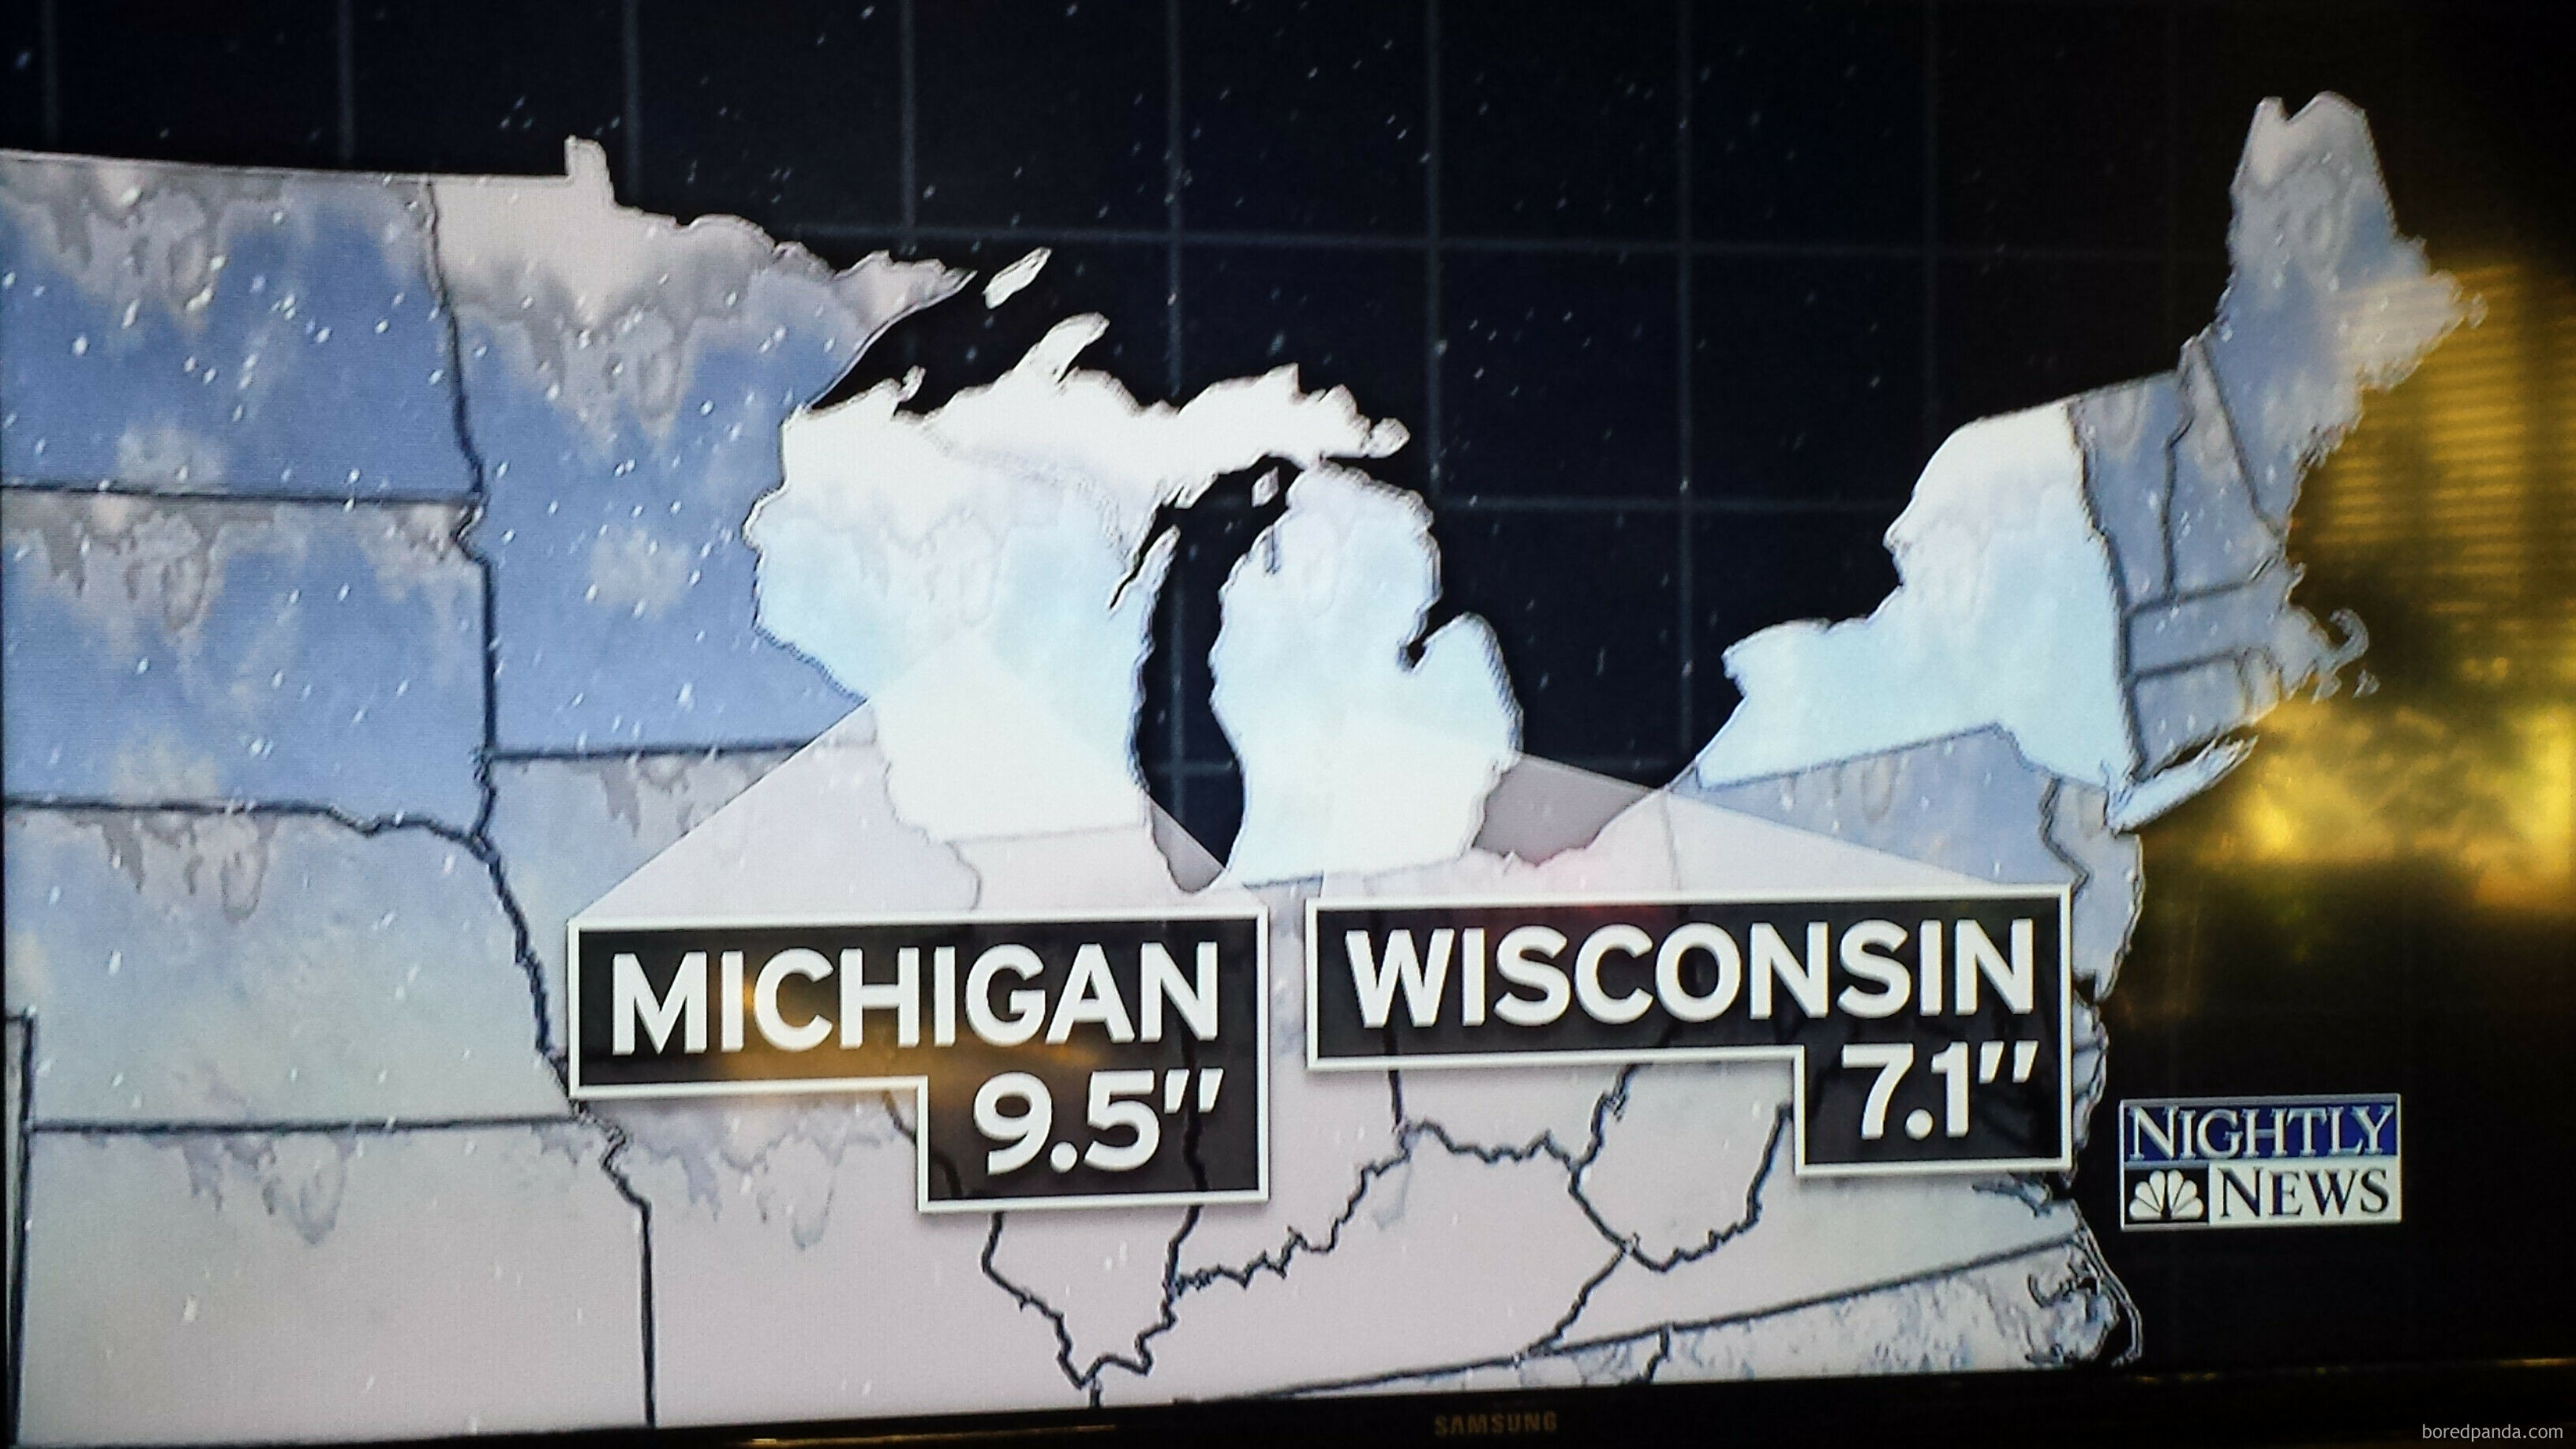 Thinking Nbc Needs A Geography Lesson